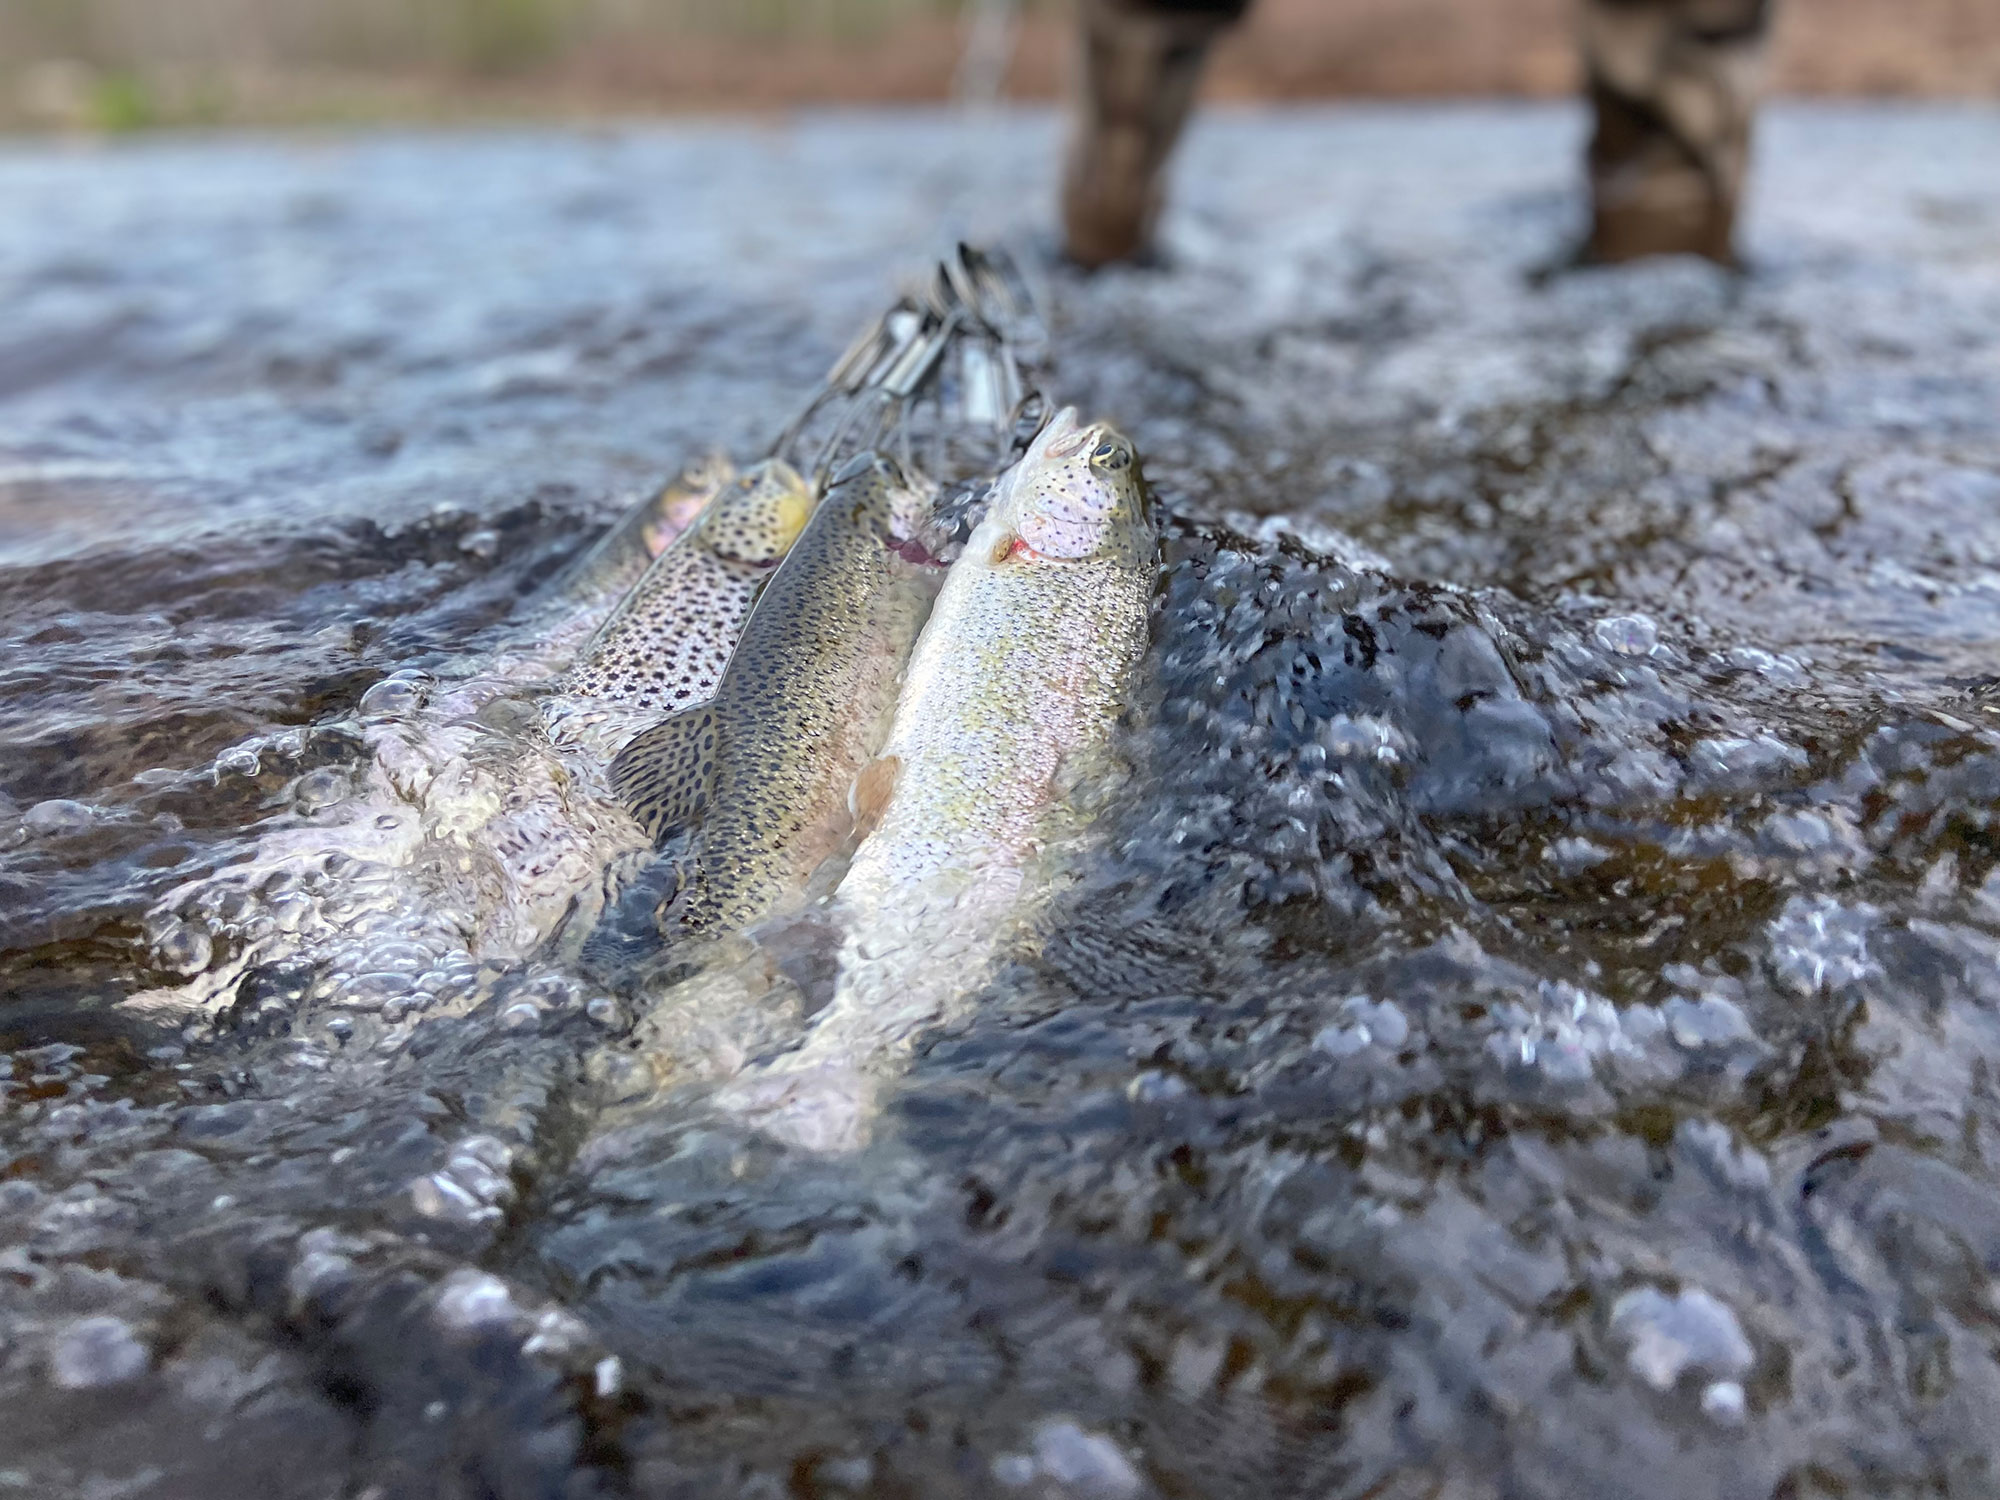 Using Lean Principles to Catch More Fish - GAME OVER ANGLING